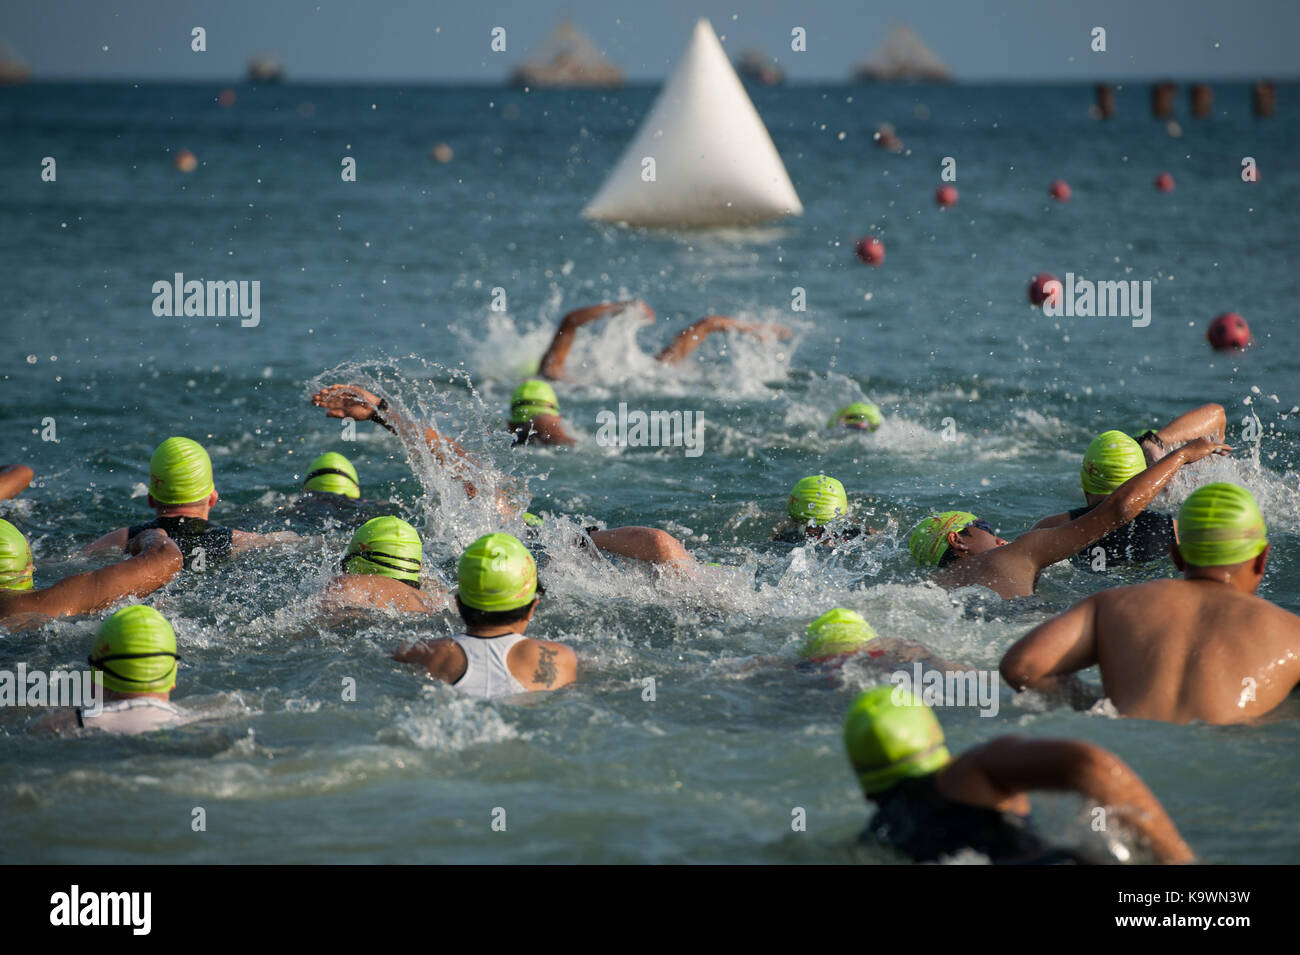 Pandeglang, Banten Province in Indonesia. 24th Sep, 2017. Participants swim during Cross Triathlon competition at Tanjung Lesung, Pandeglang District, Banten Province in Indonesia, Sept. 24, 2017. Credit: Veri Sanovri/Xinhua/Alamy Live News Stock Photo